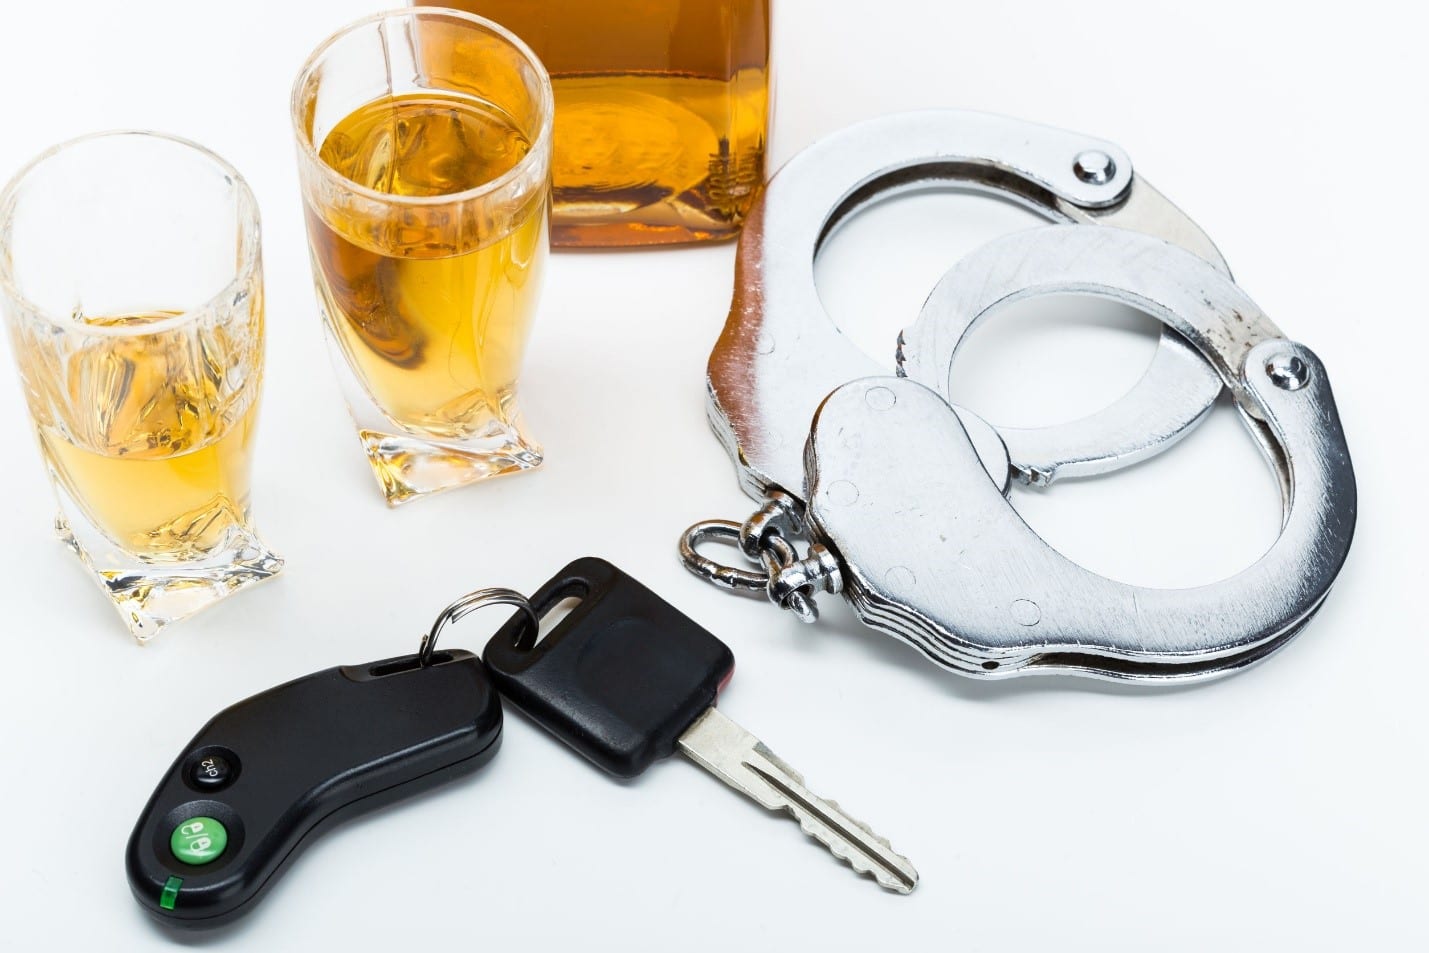 What to Expect from Your Minnesota DWI Case